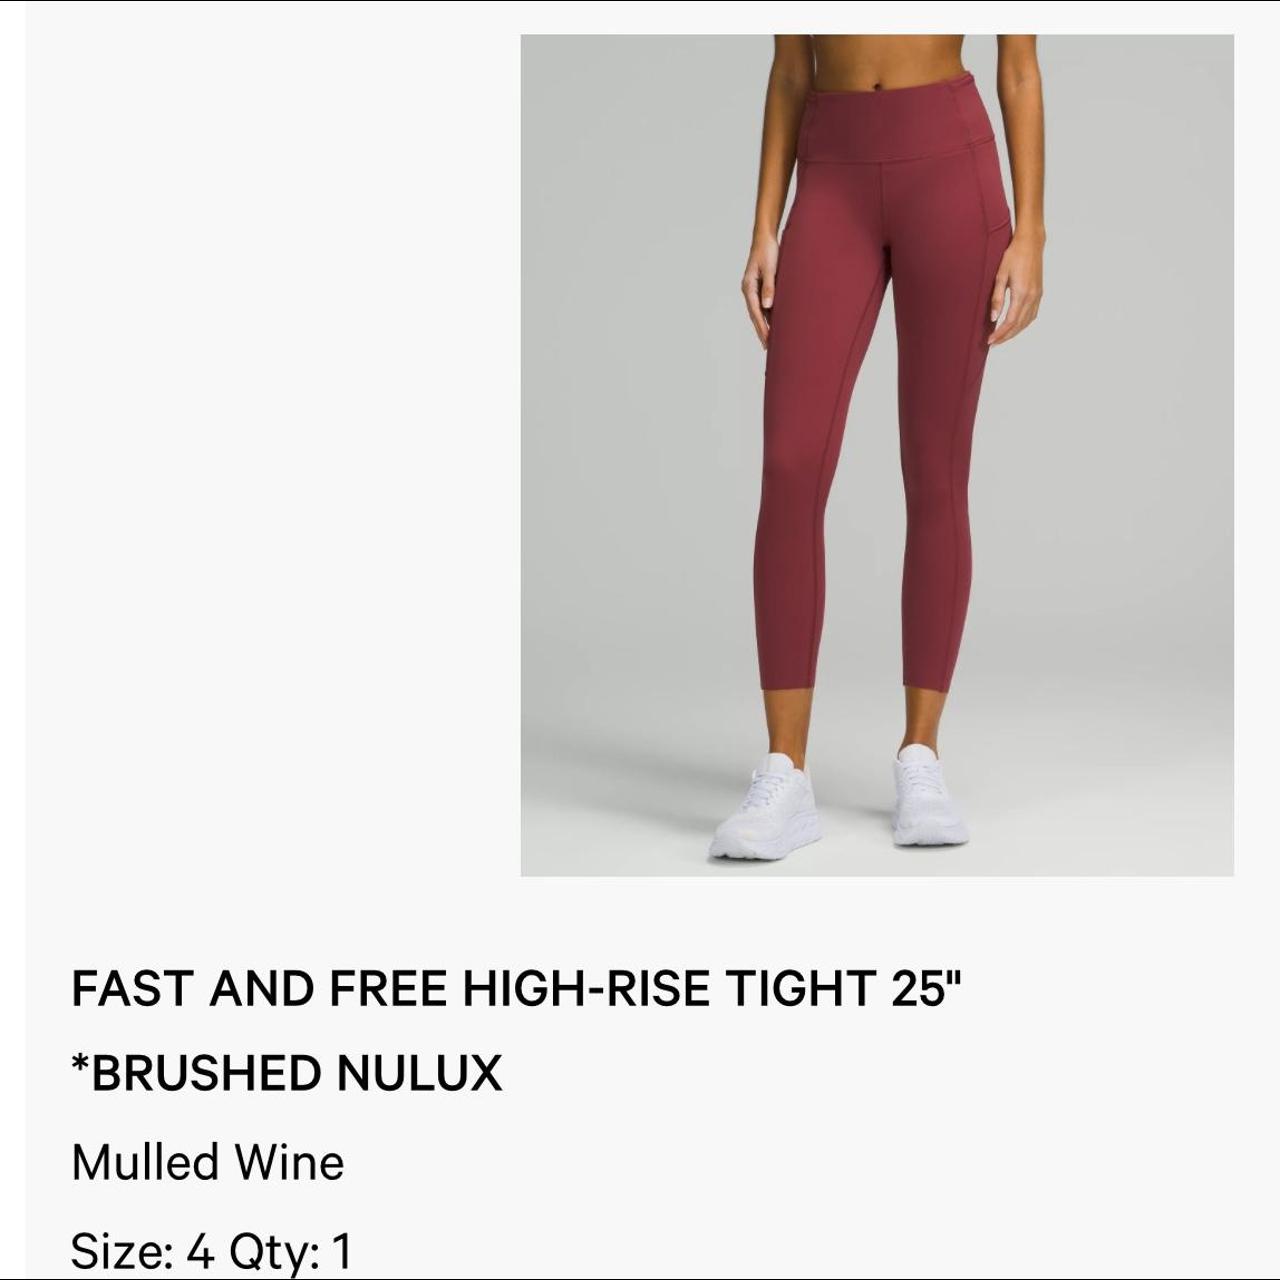 Fast and Free High-Rise Tight 25